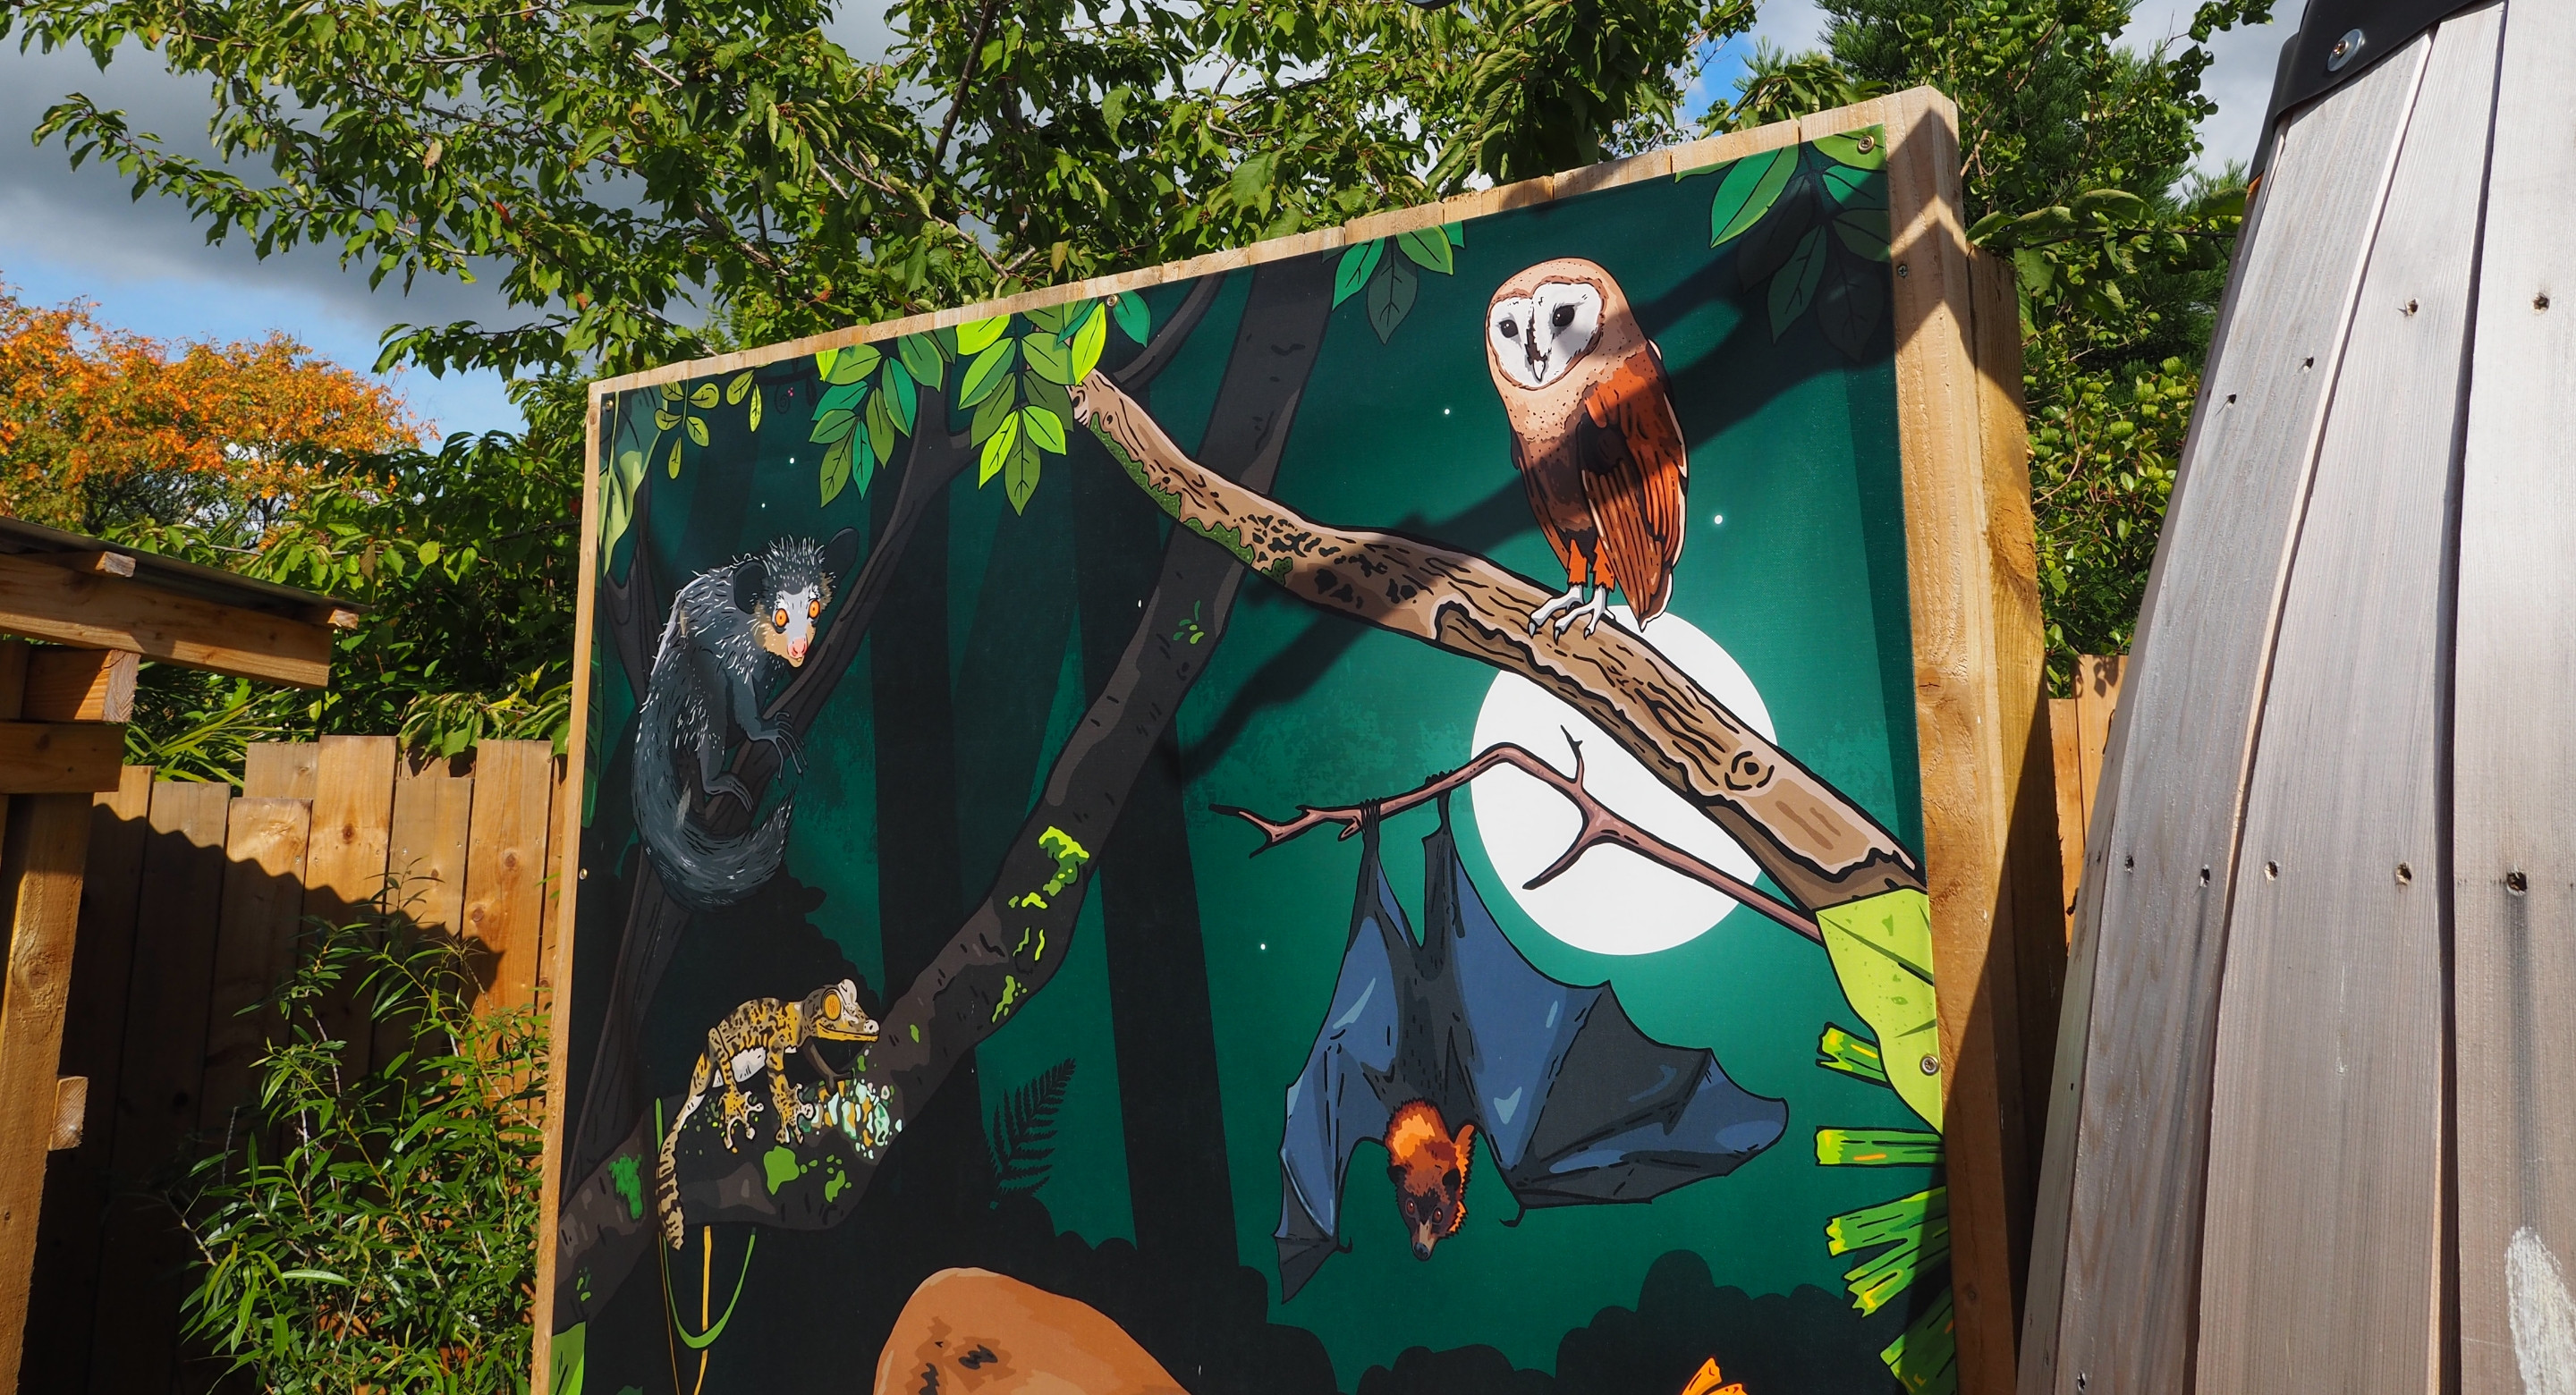 Chester Zoo illustrated night mural by Root Studio